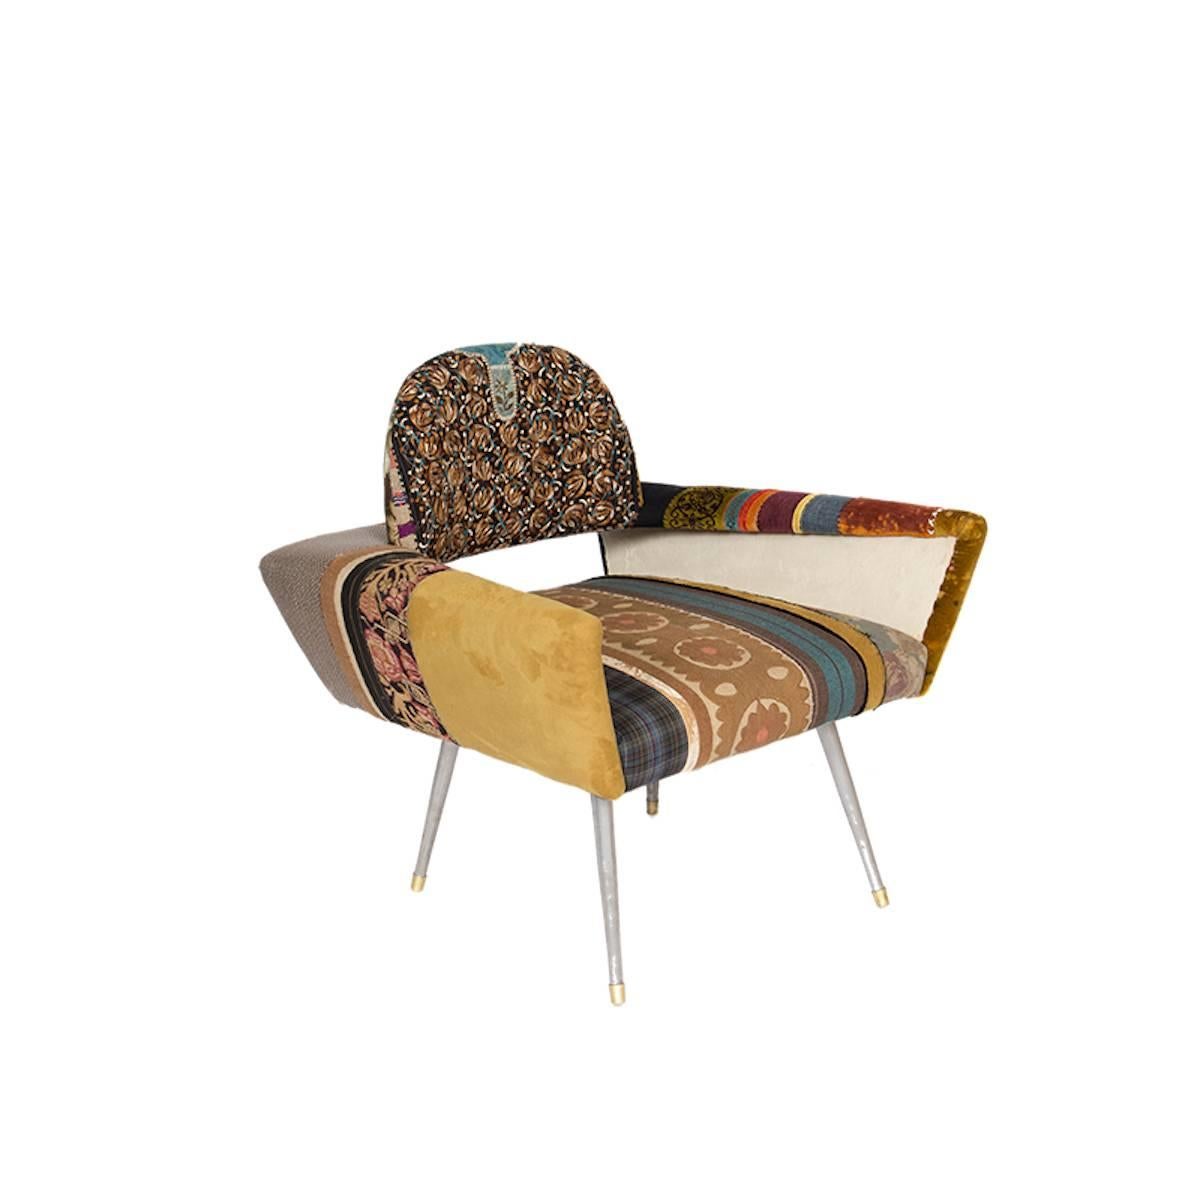 Bokja Couture armchair, made from vintage fabric gathered from different regions of the world. These chairs are handmade and no two chairs look the same, for that reason there might be slight differences between each product. 

Through trade and